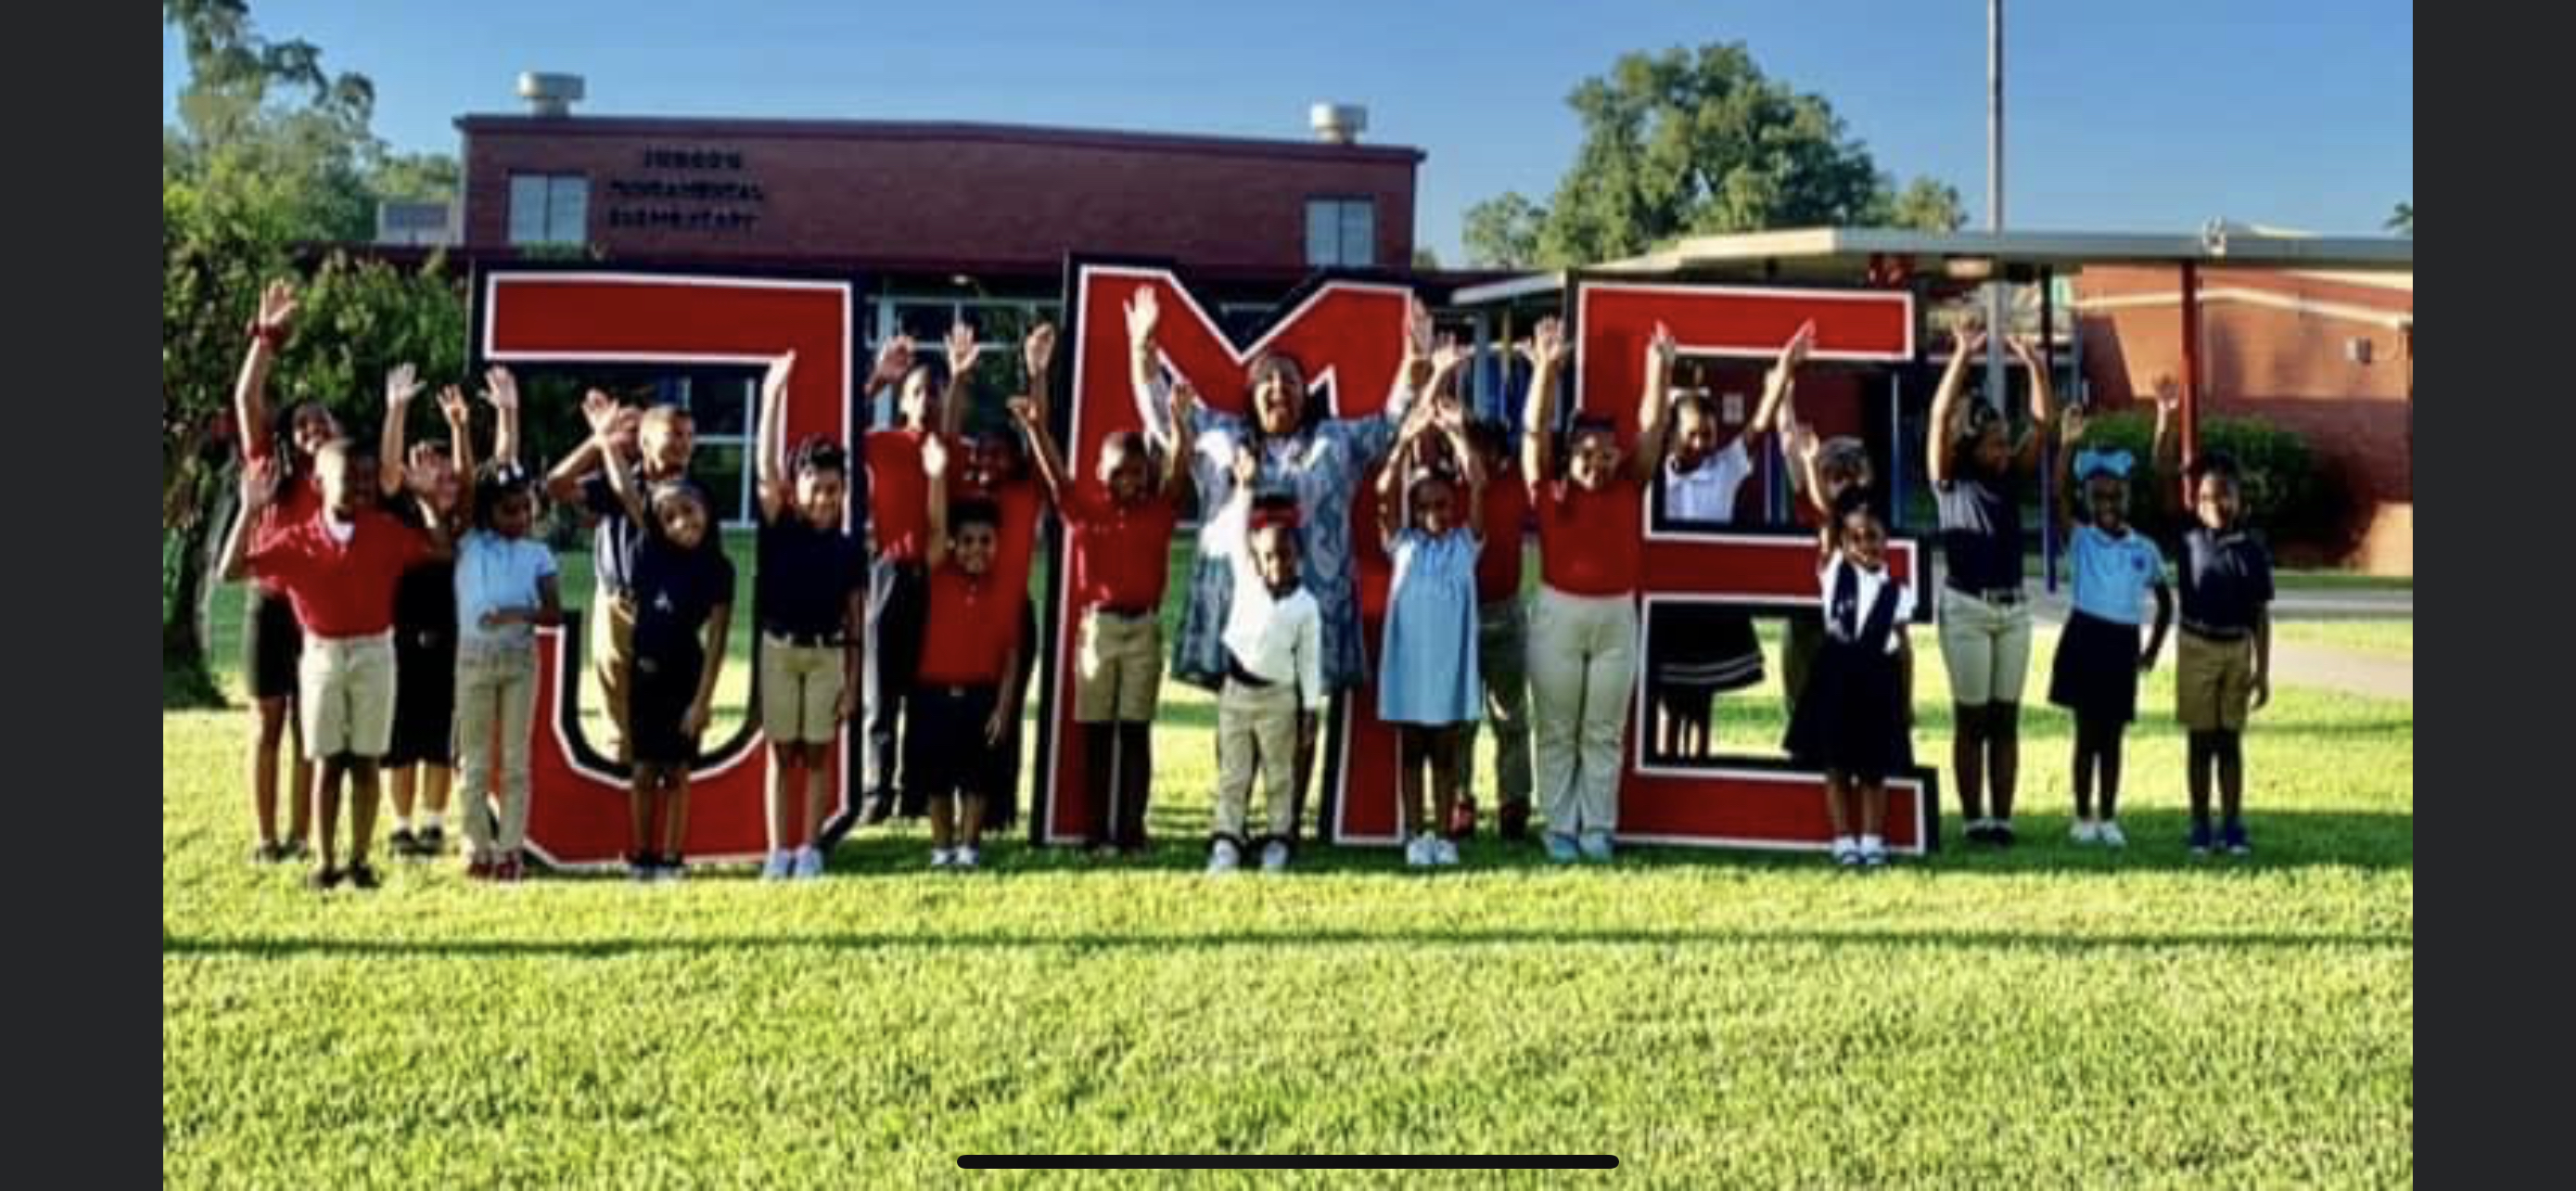 Judson students with new letters 